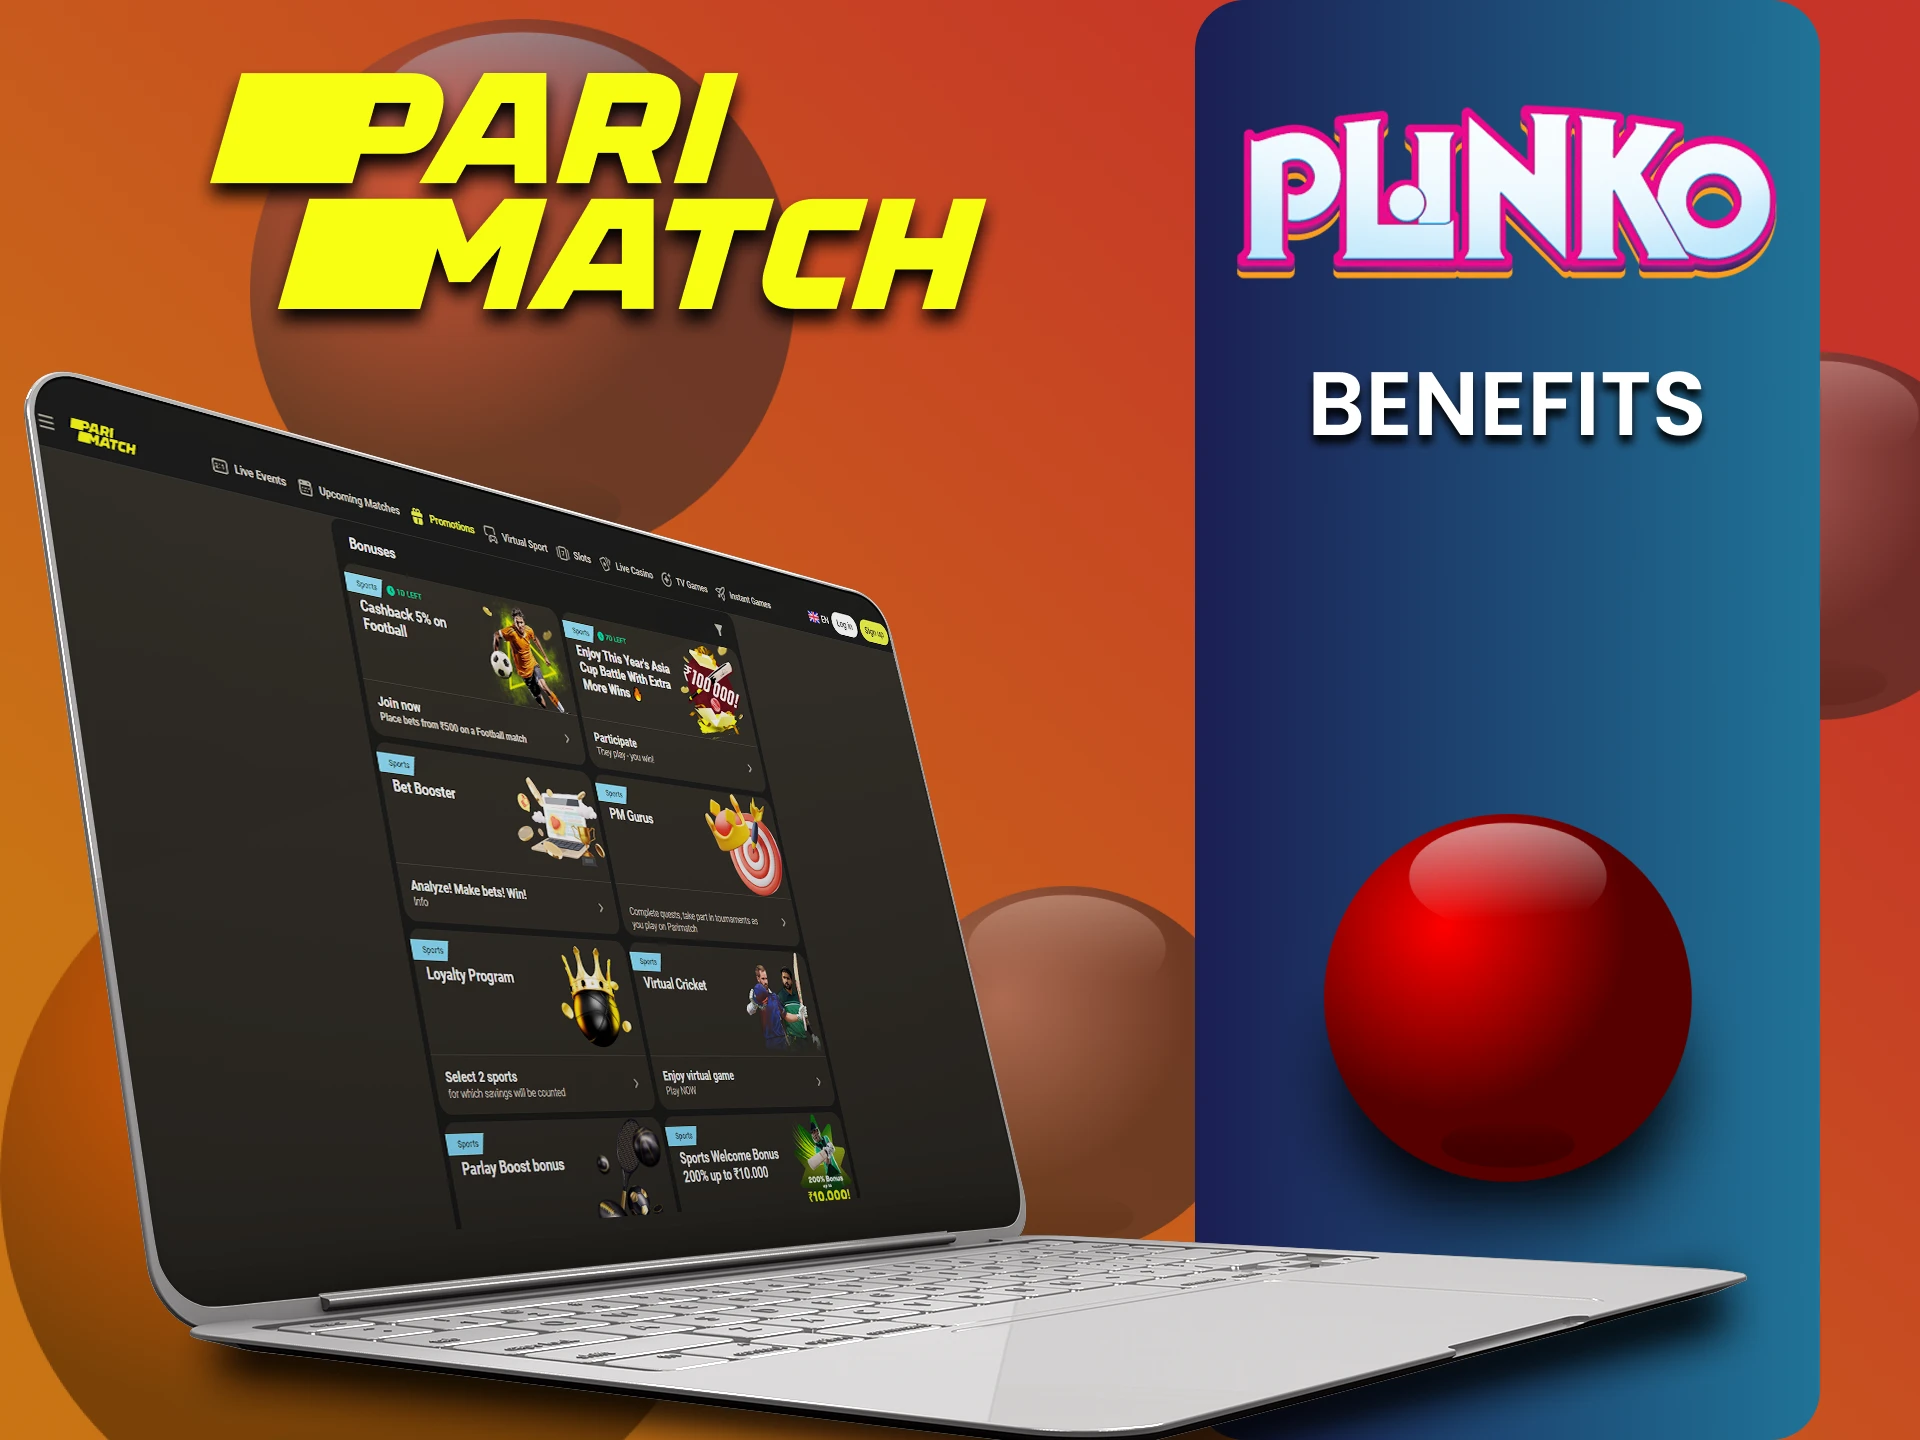 Parimatch has many advantages for playing Plinko.